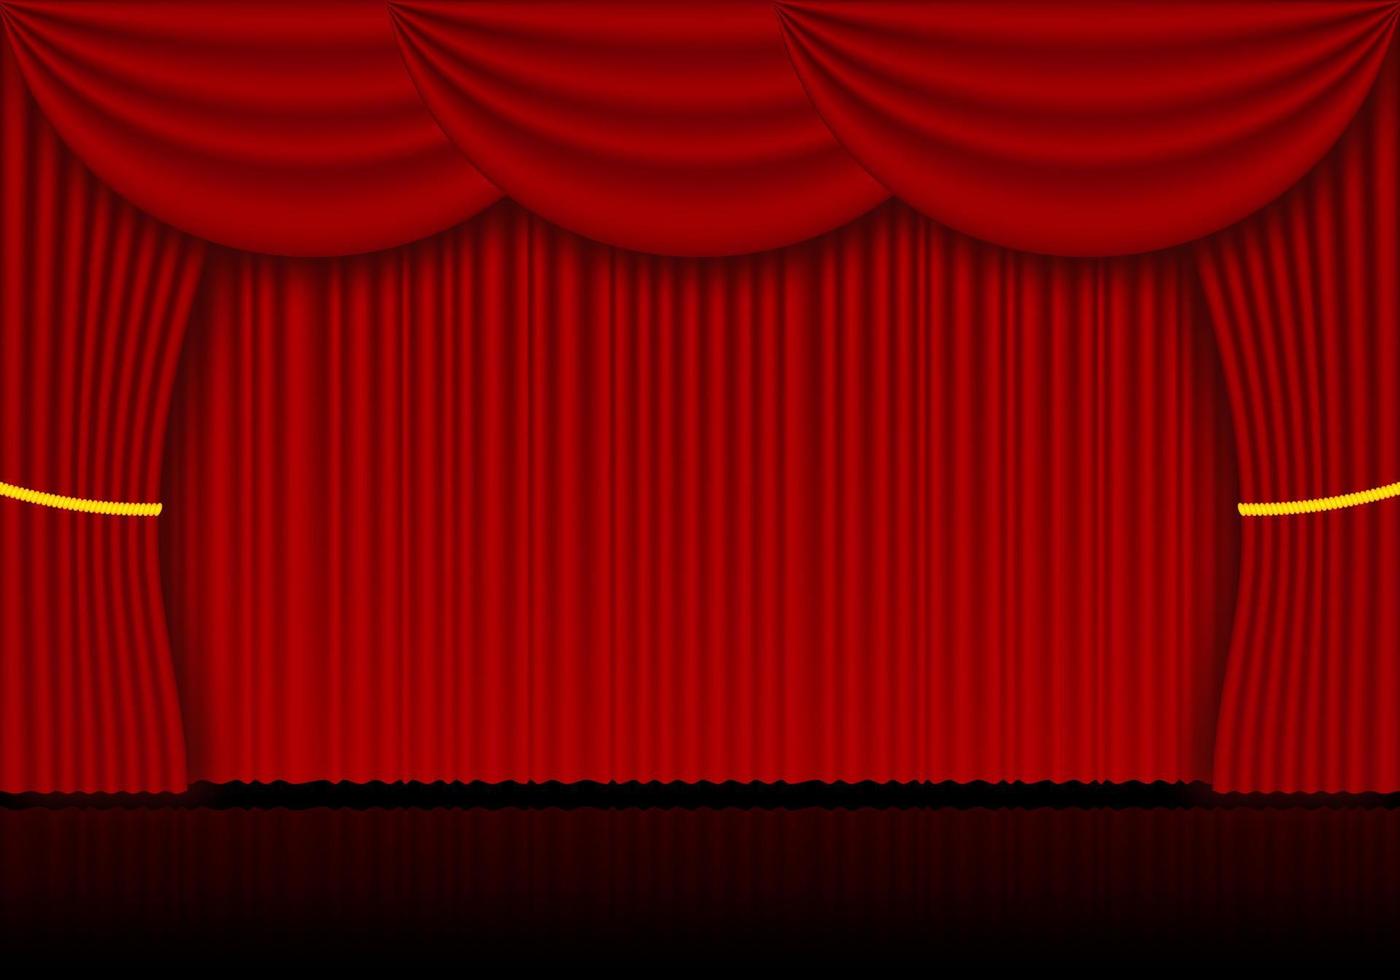 Red curtain opera, cinema or theater stage drapes. Spotlight on closed velvet curtains background. Vector illustration